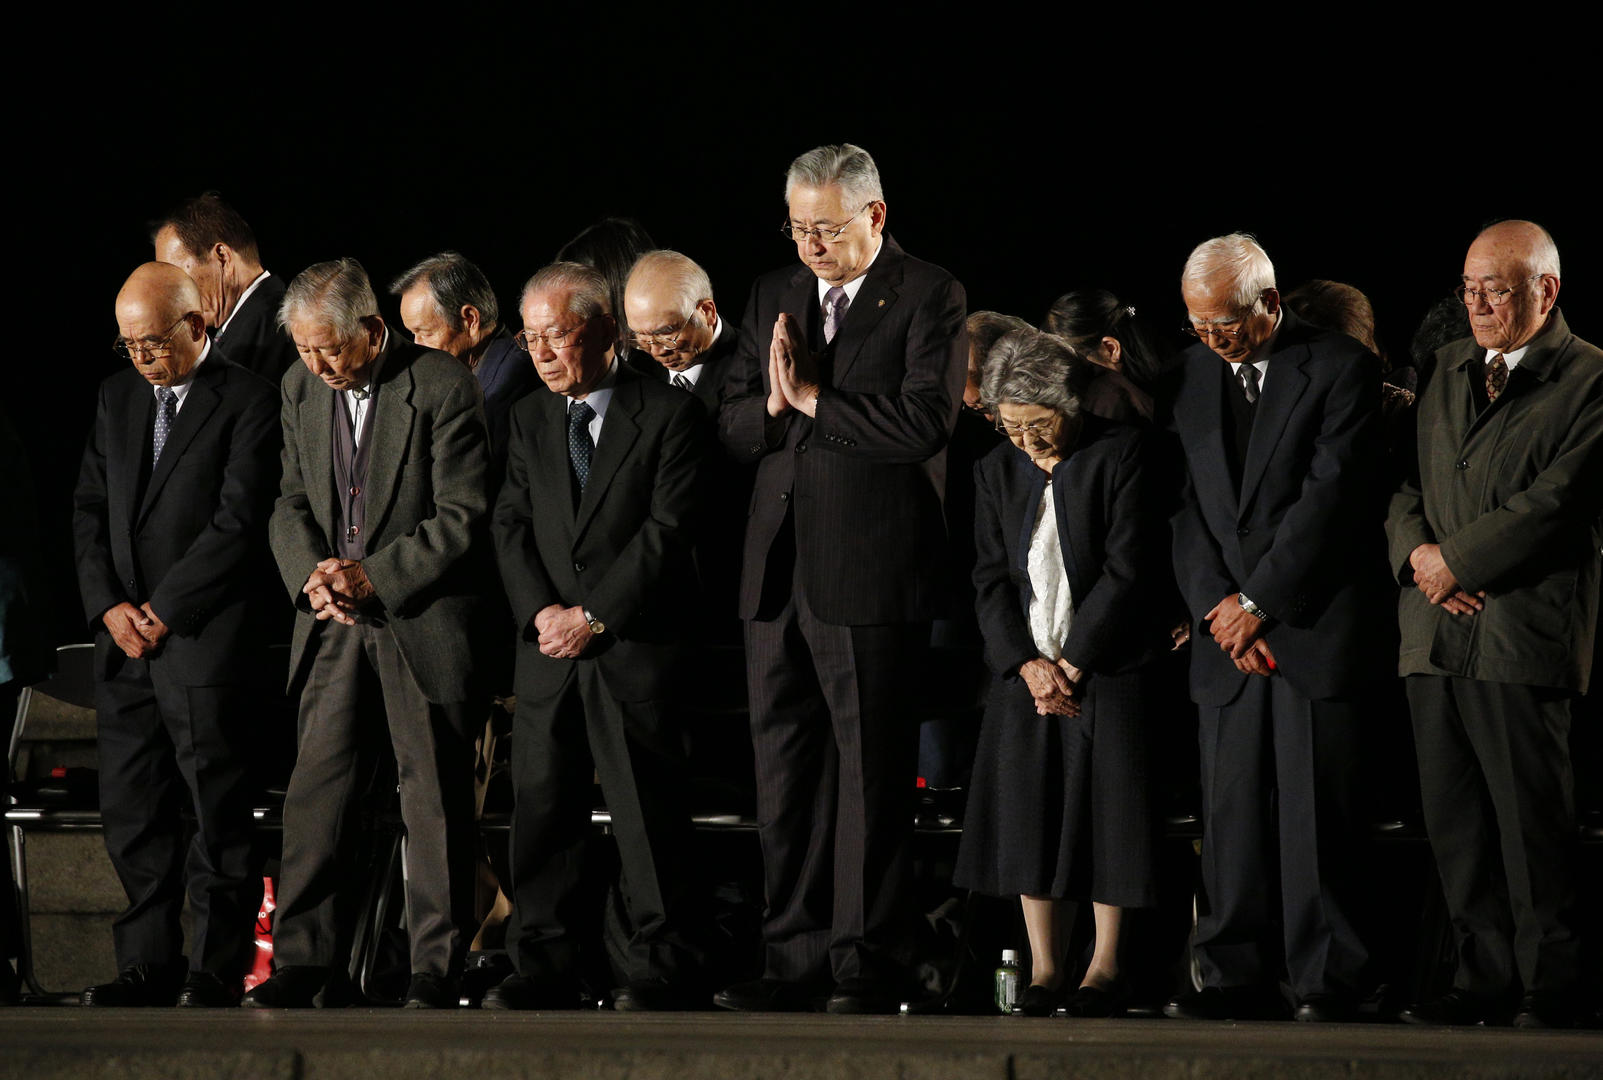 Victims of the 1945 atomic bombing observe a moment of silence during a meeting for peace led by Pope Francis at the Hiroshima Peace Memorial in Hiroshima, Japan, Nov. 24, 2019.